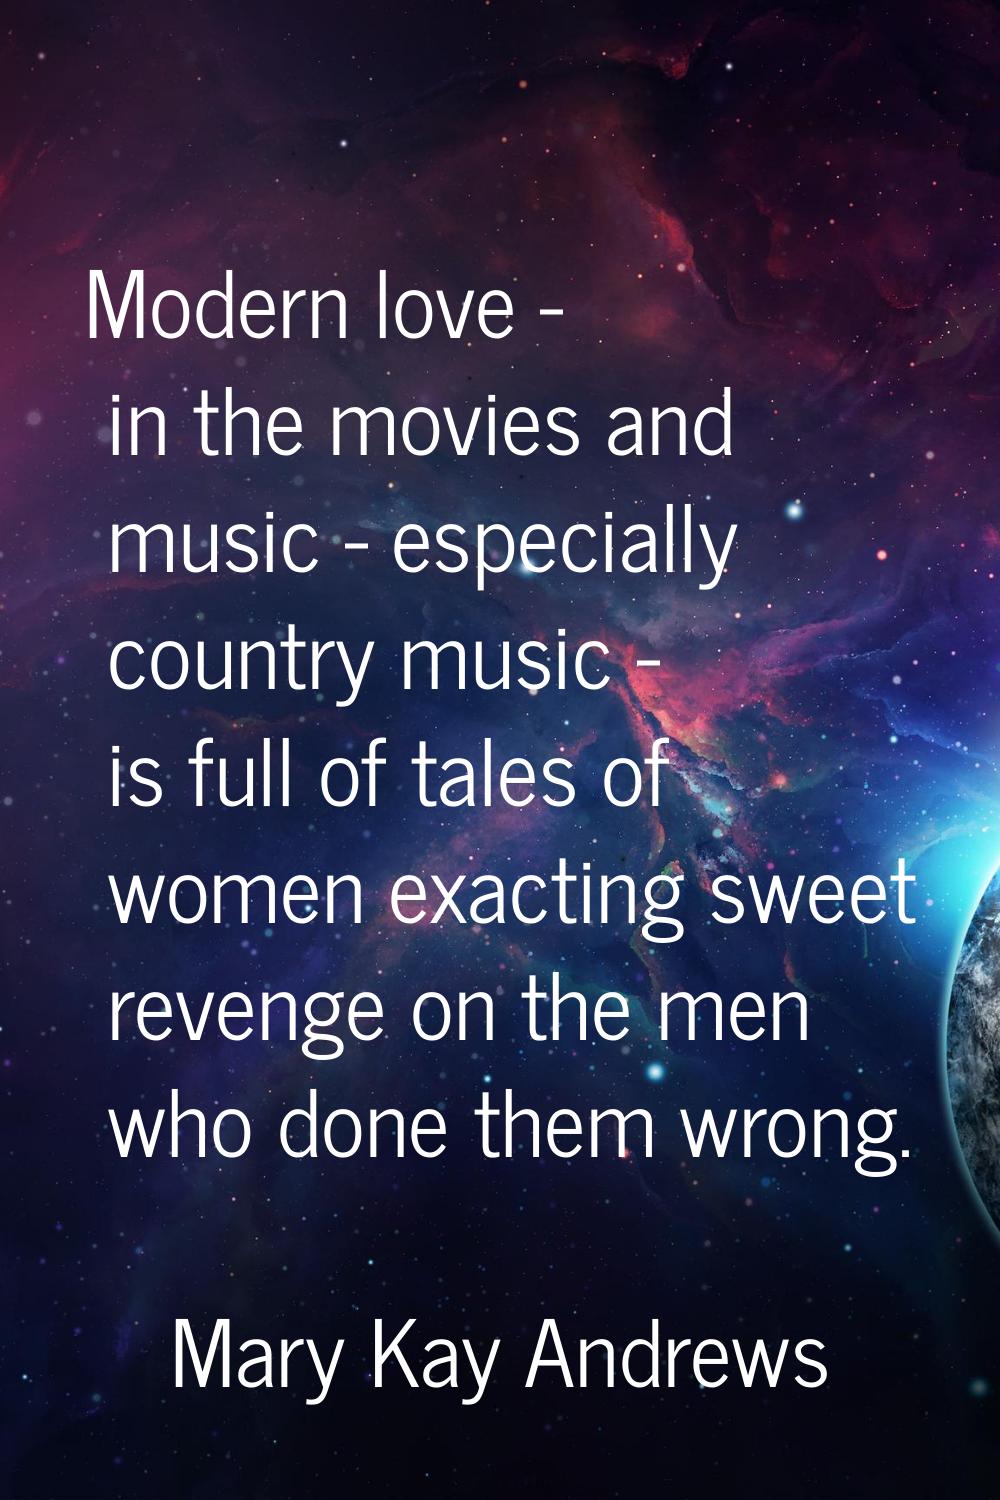 Modern love - in the movies and music - especially country music - is full of tales of women exacti